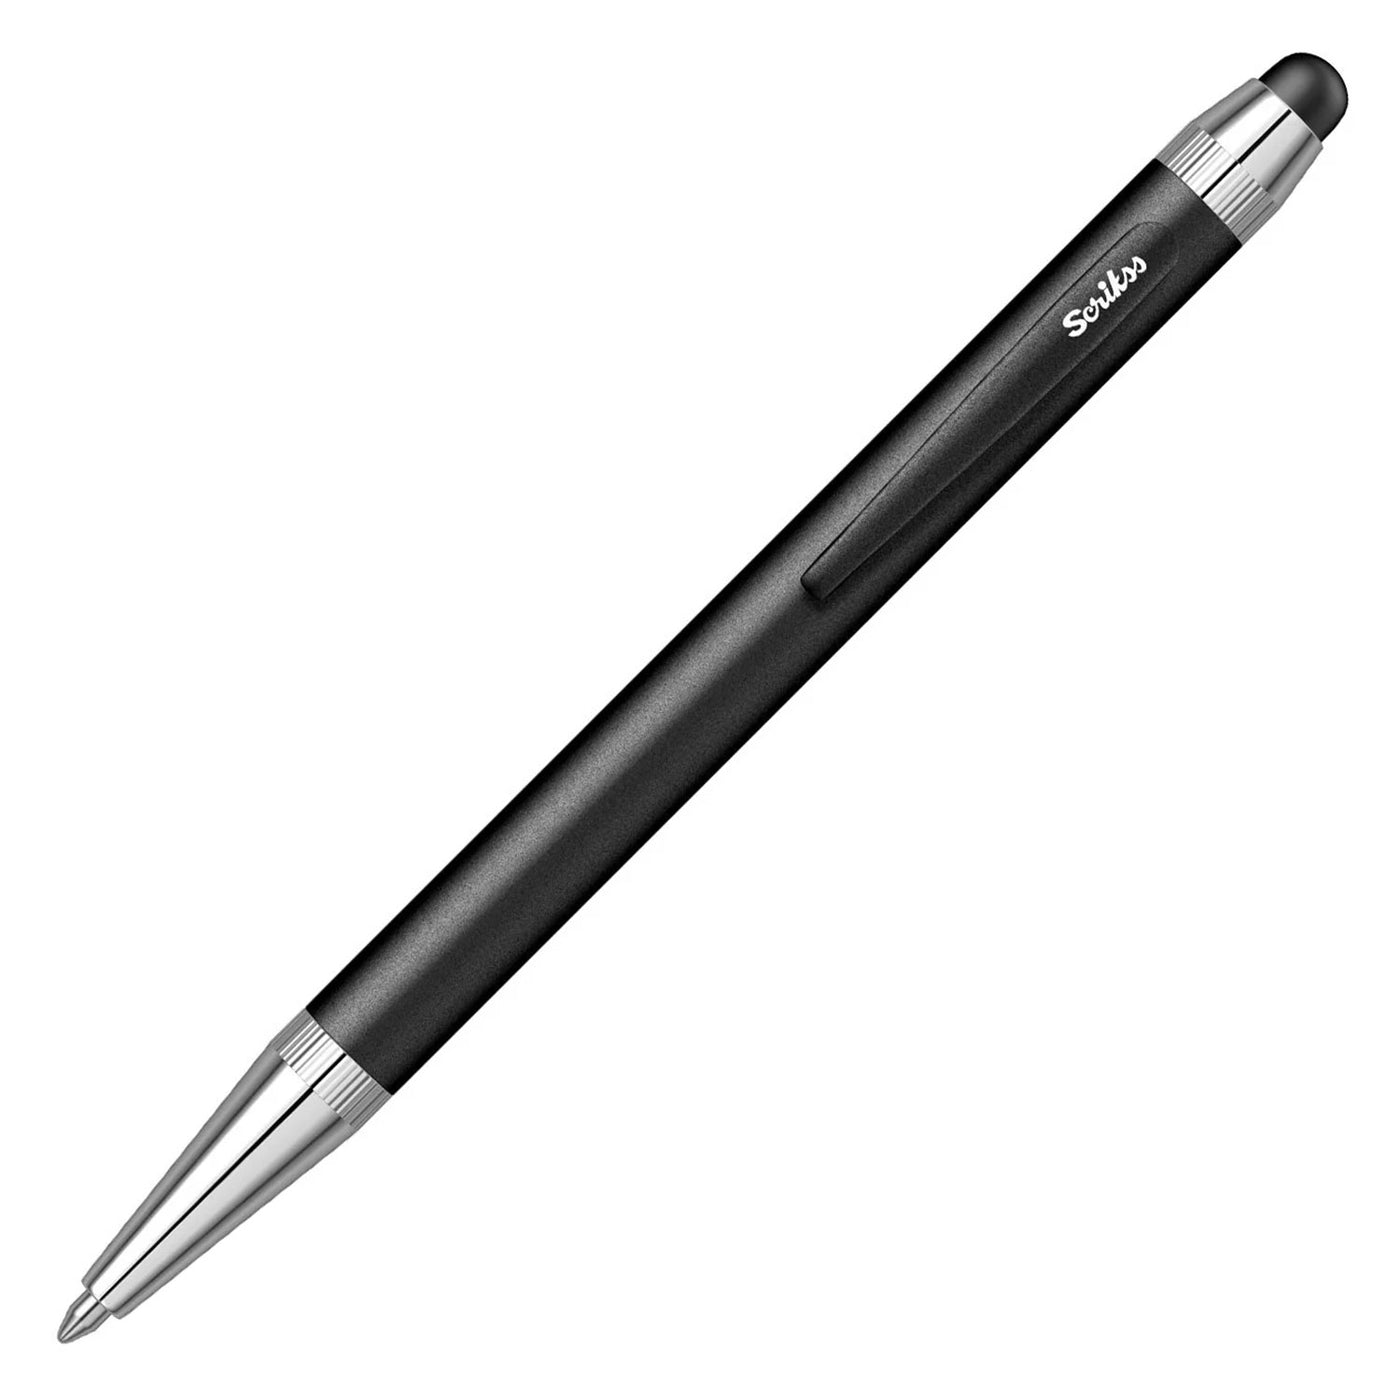 Scrikss Smart 699 Multifunction Ball Pen with Stylus - Black CT 1